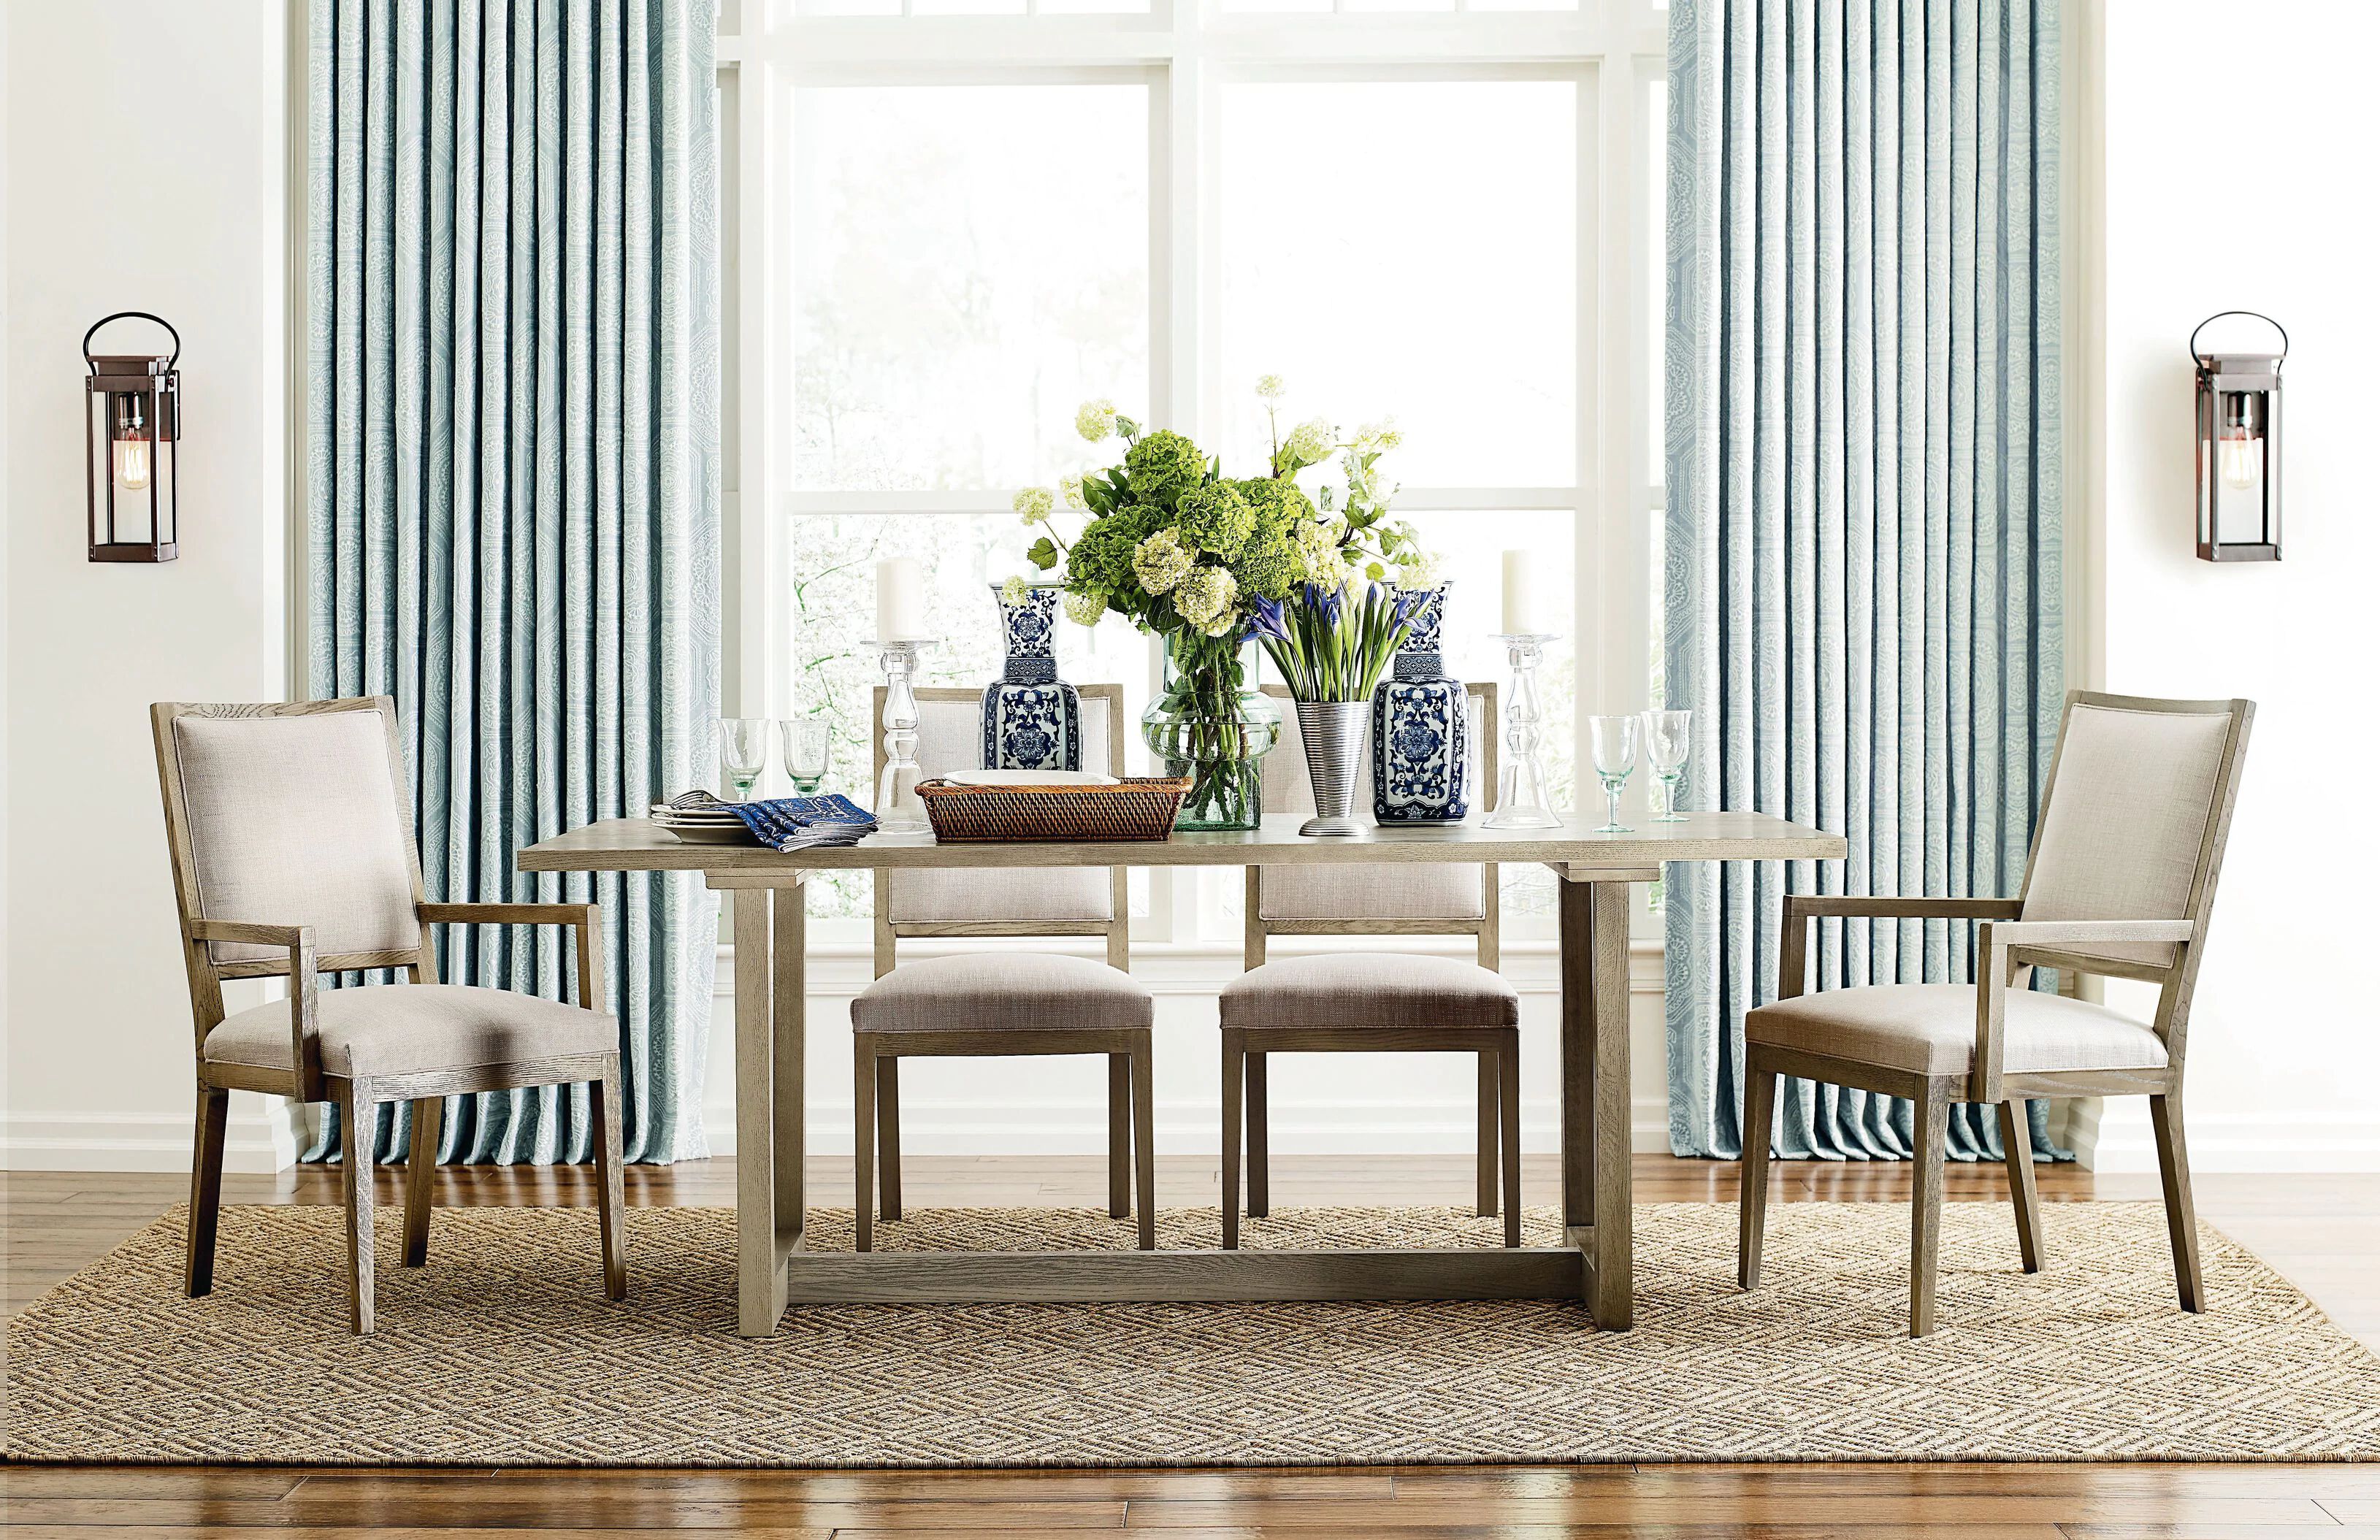 bright dining area with large window, framed by blue curtains